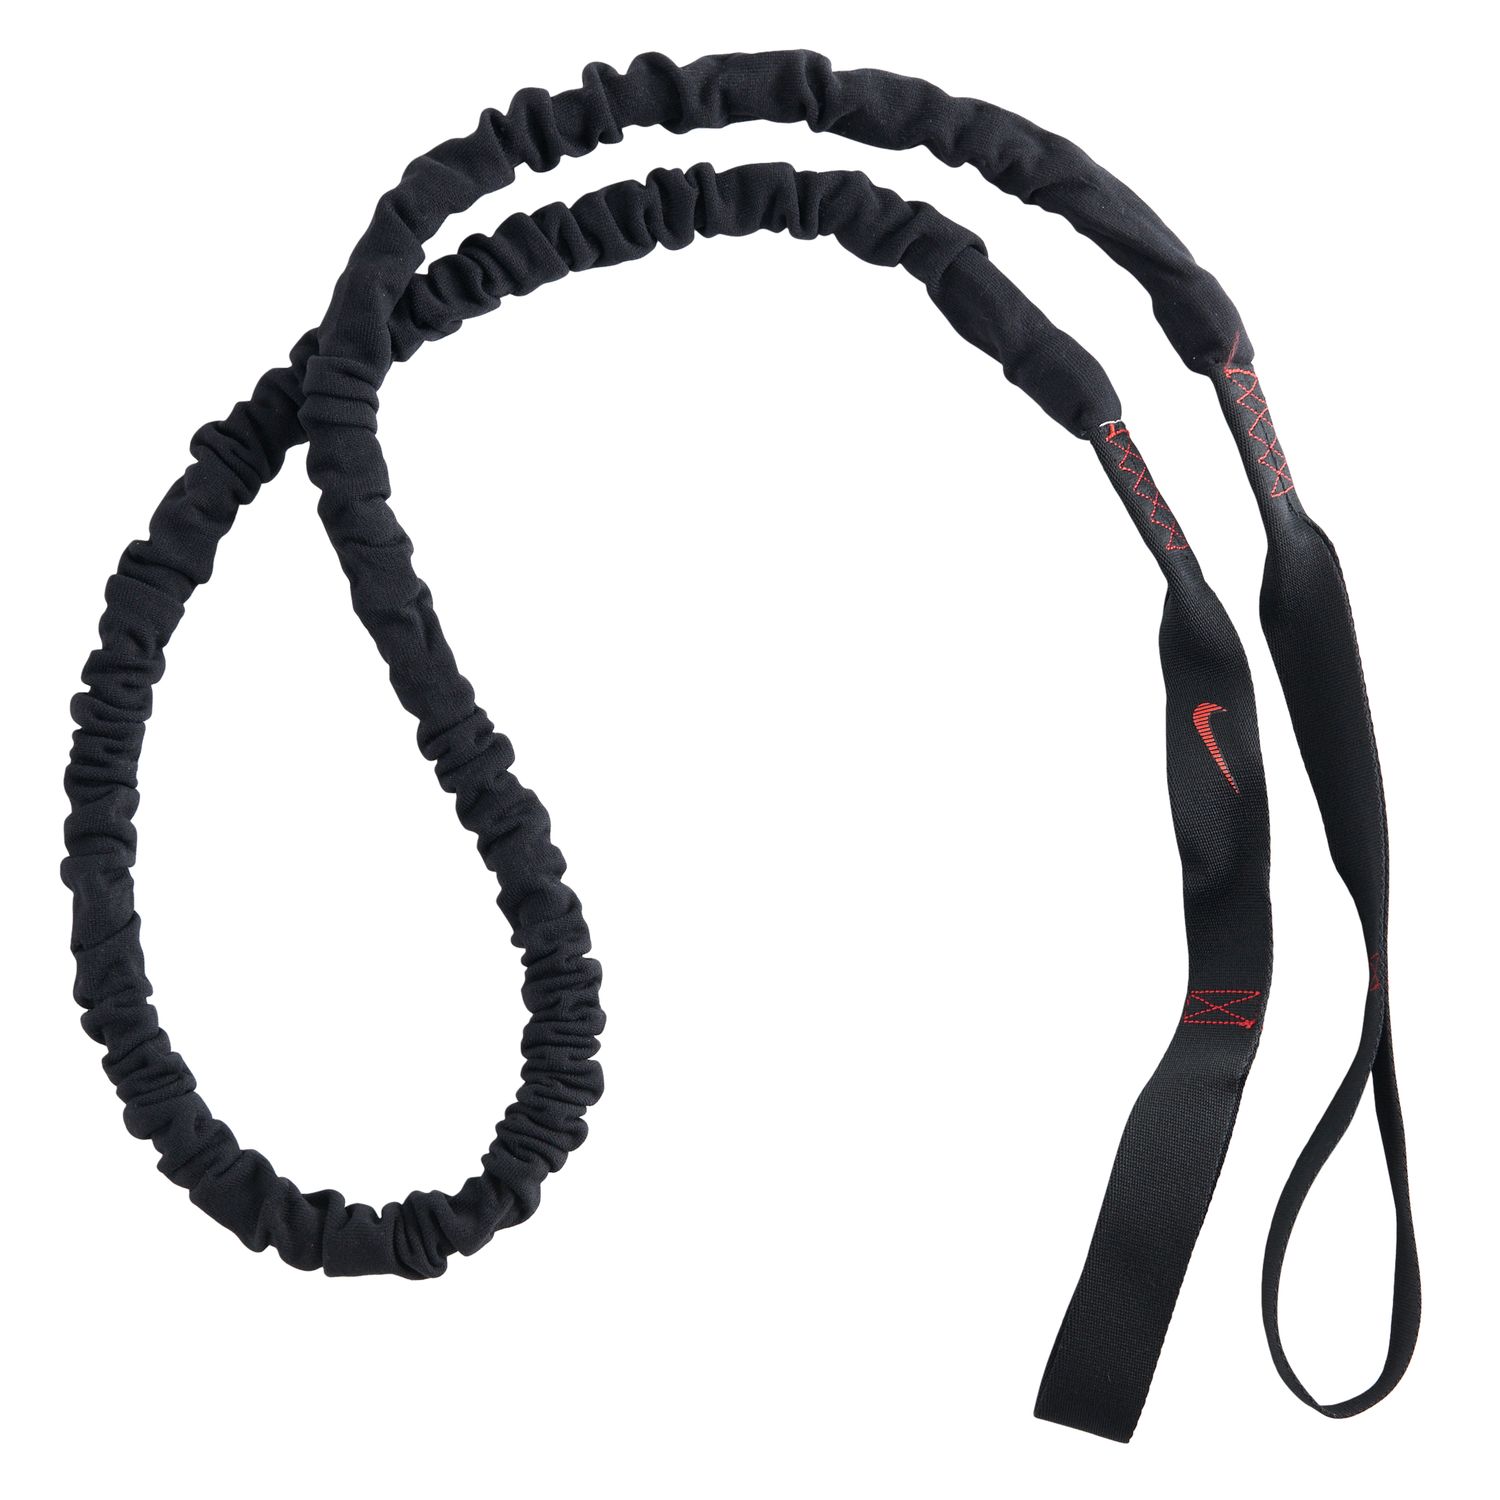 nike resistance bands with handles